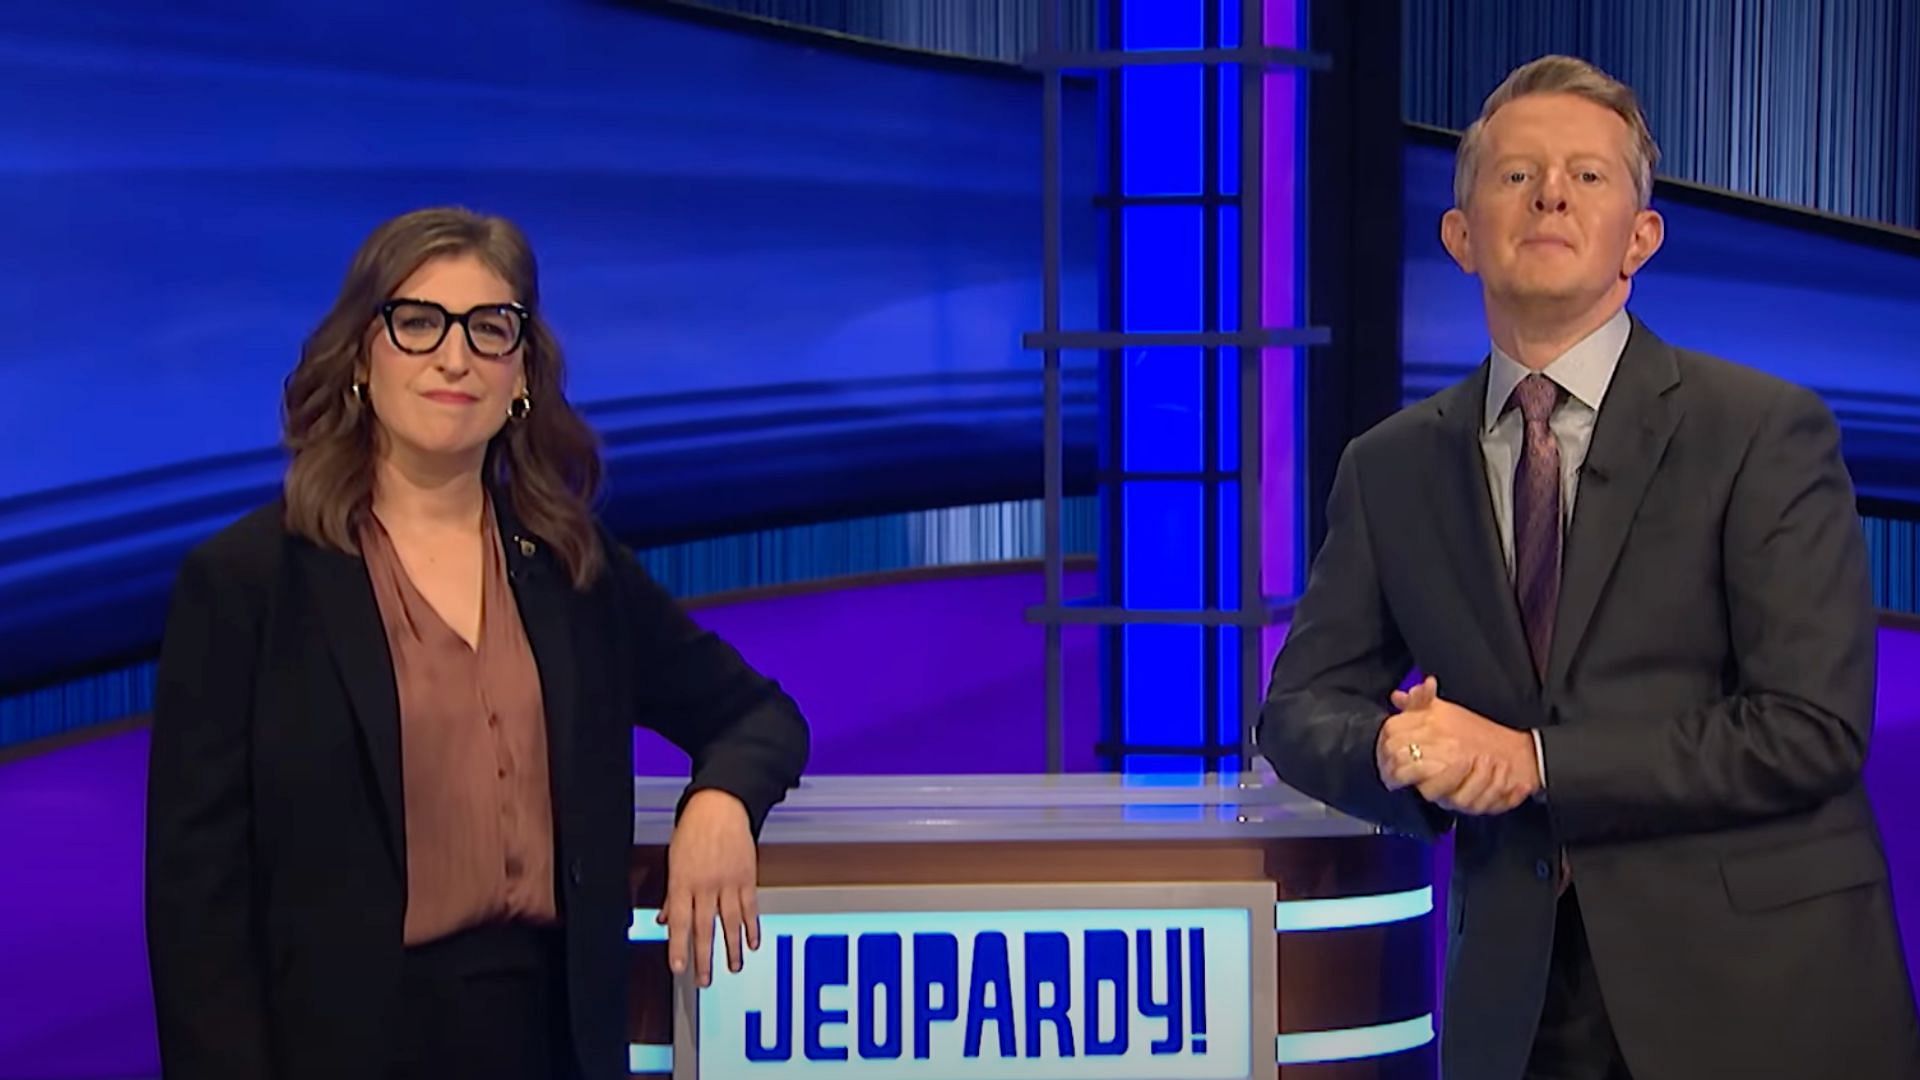 Mayim Bialik and Ken Jennings are co-hosts of Jeopardy!